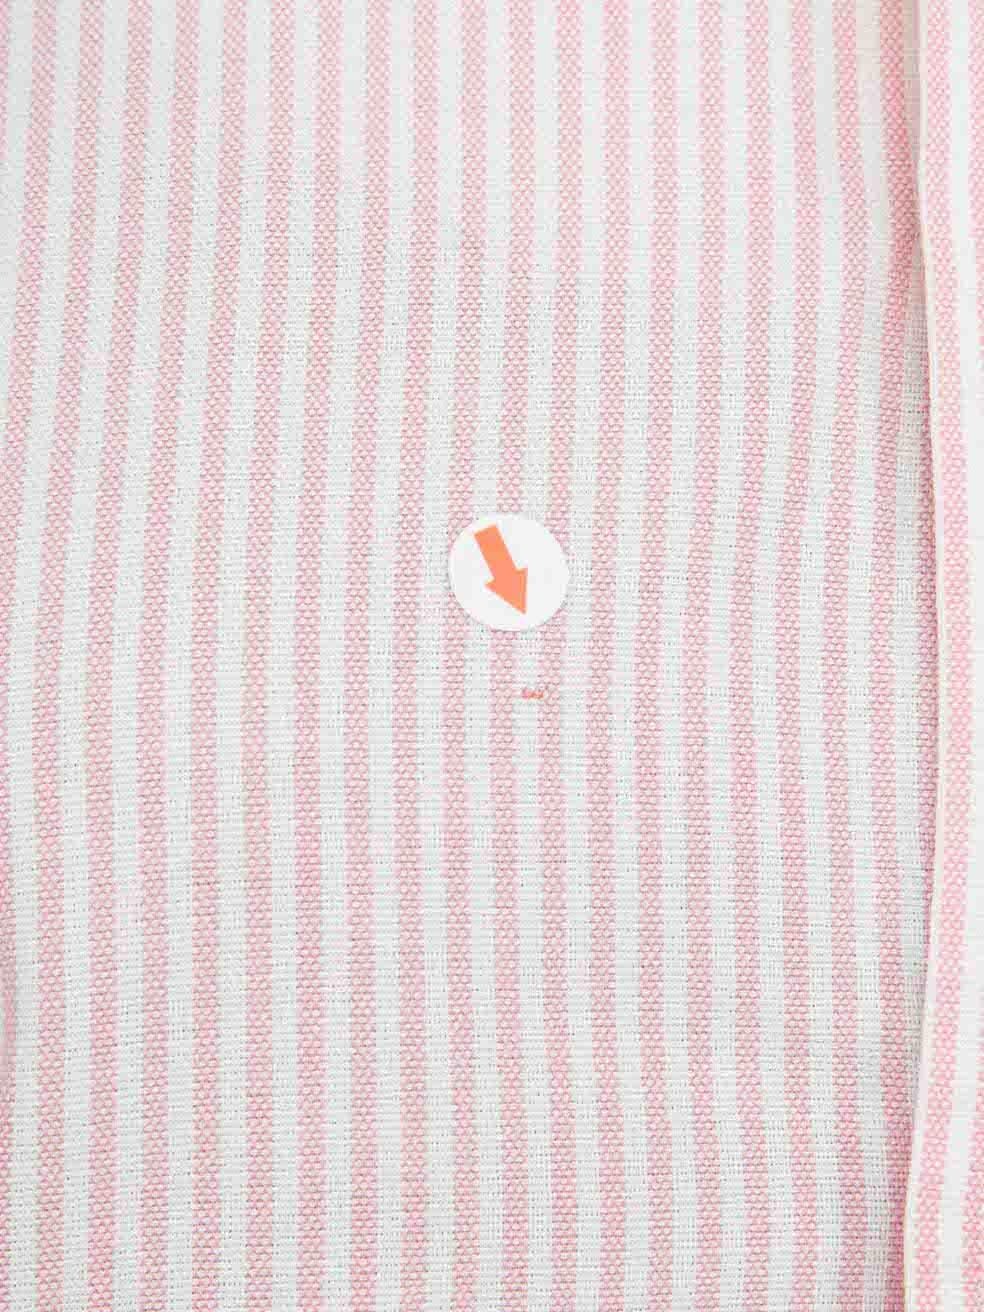 Ralph Lauren Pink Striped Long Sleeves Shirt Size M For Sale 2